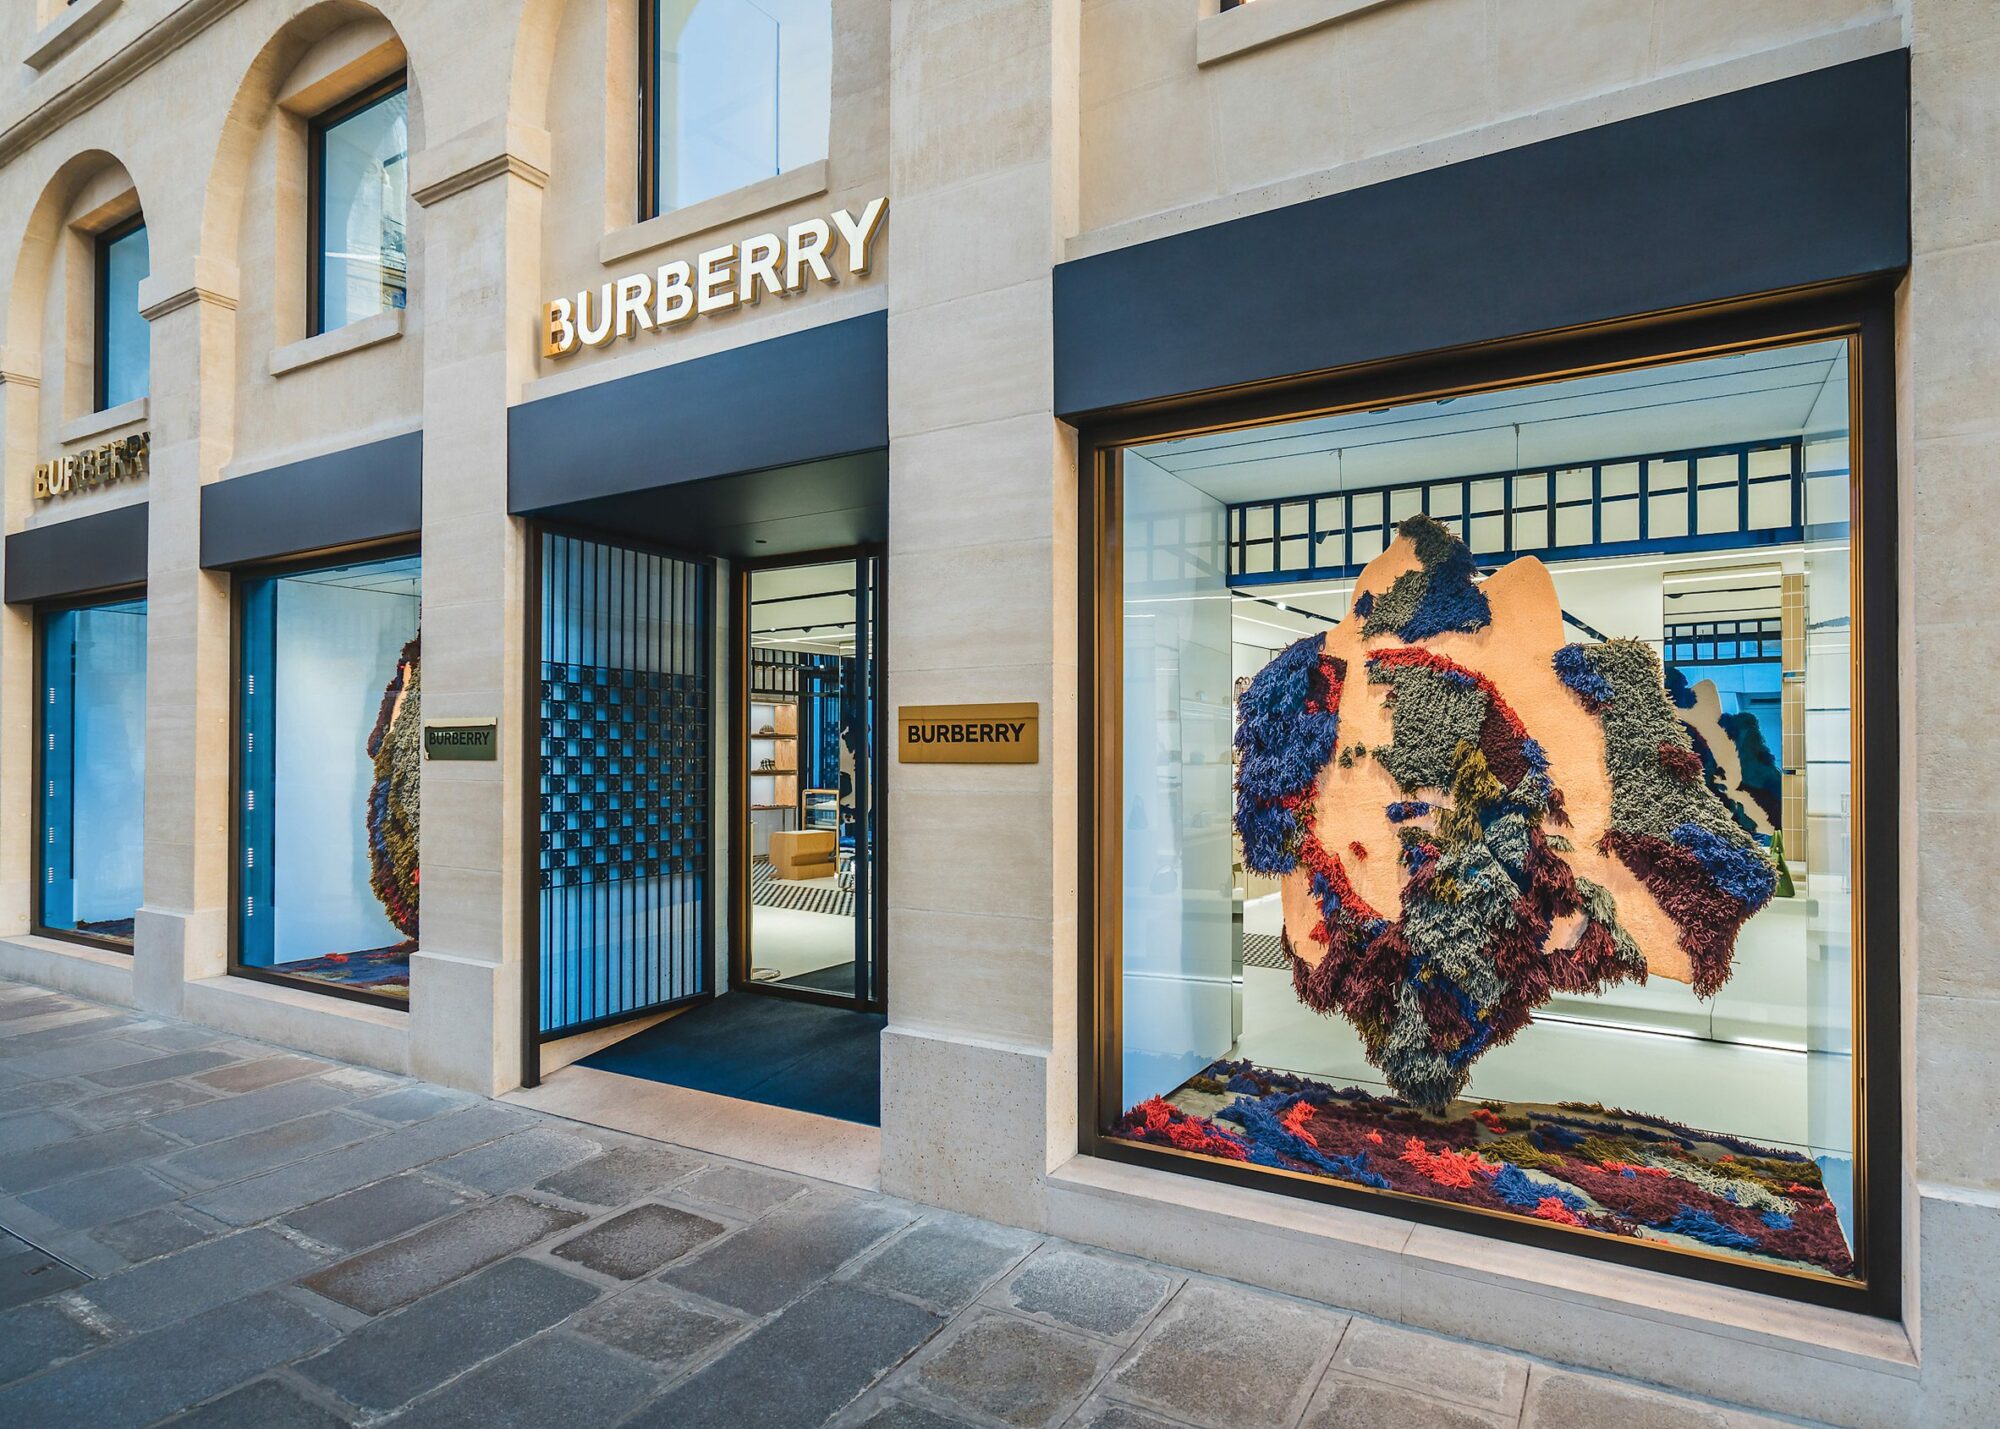 Burberry (BRBY) Share Price Fell 4.57% on Weak LVMH Q3 Sales